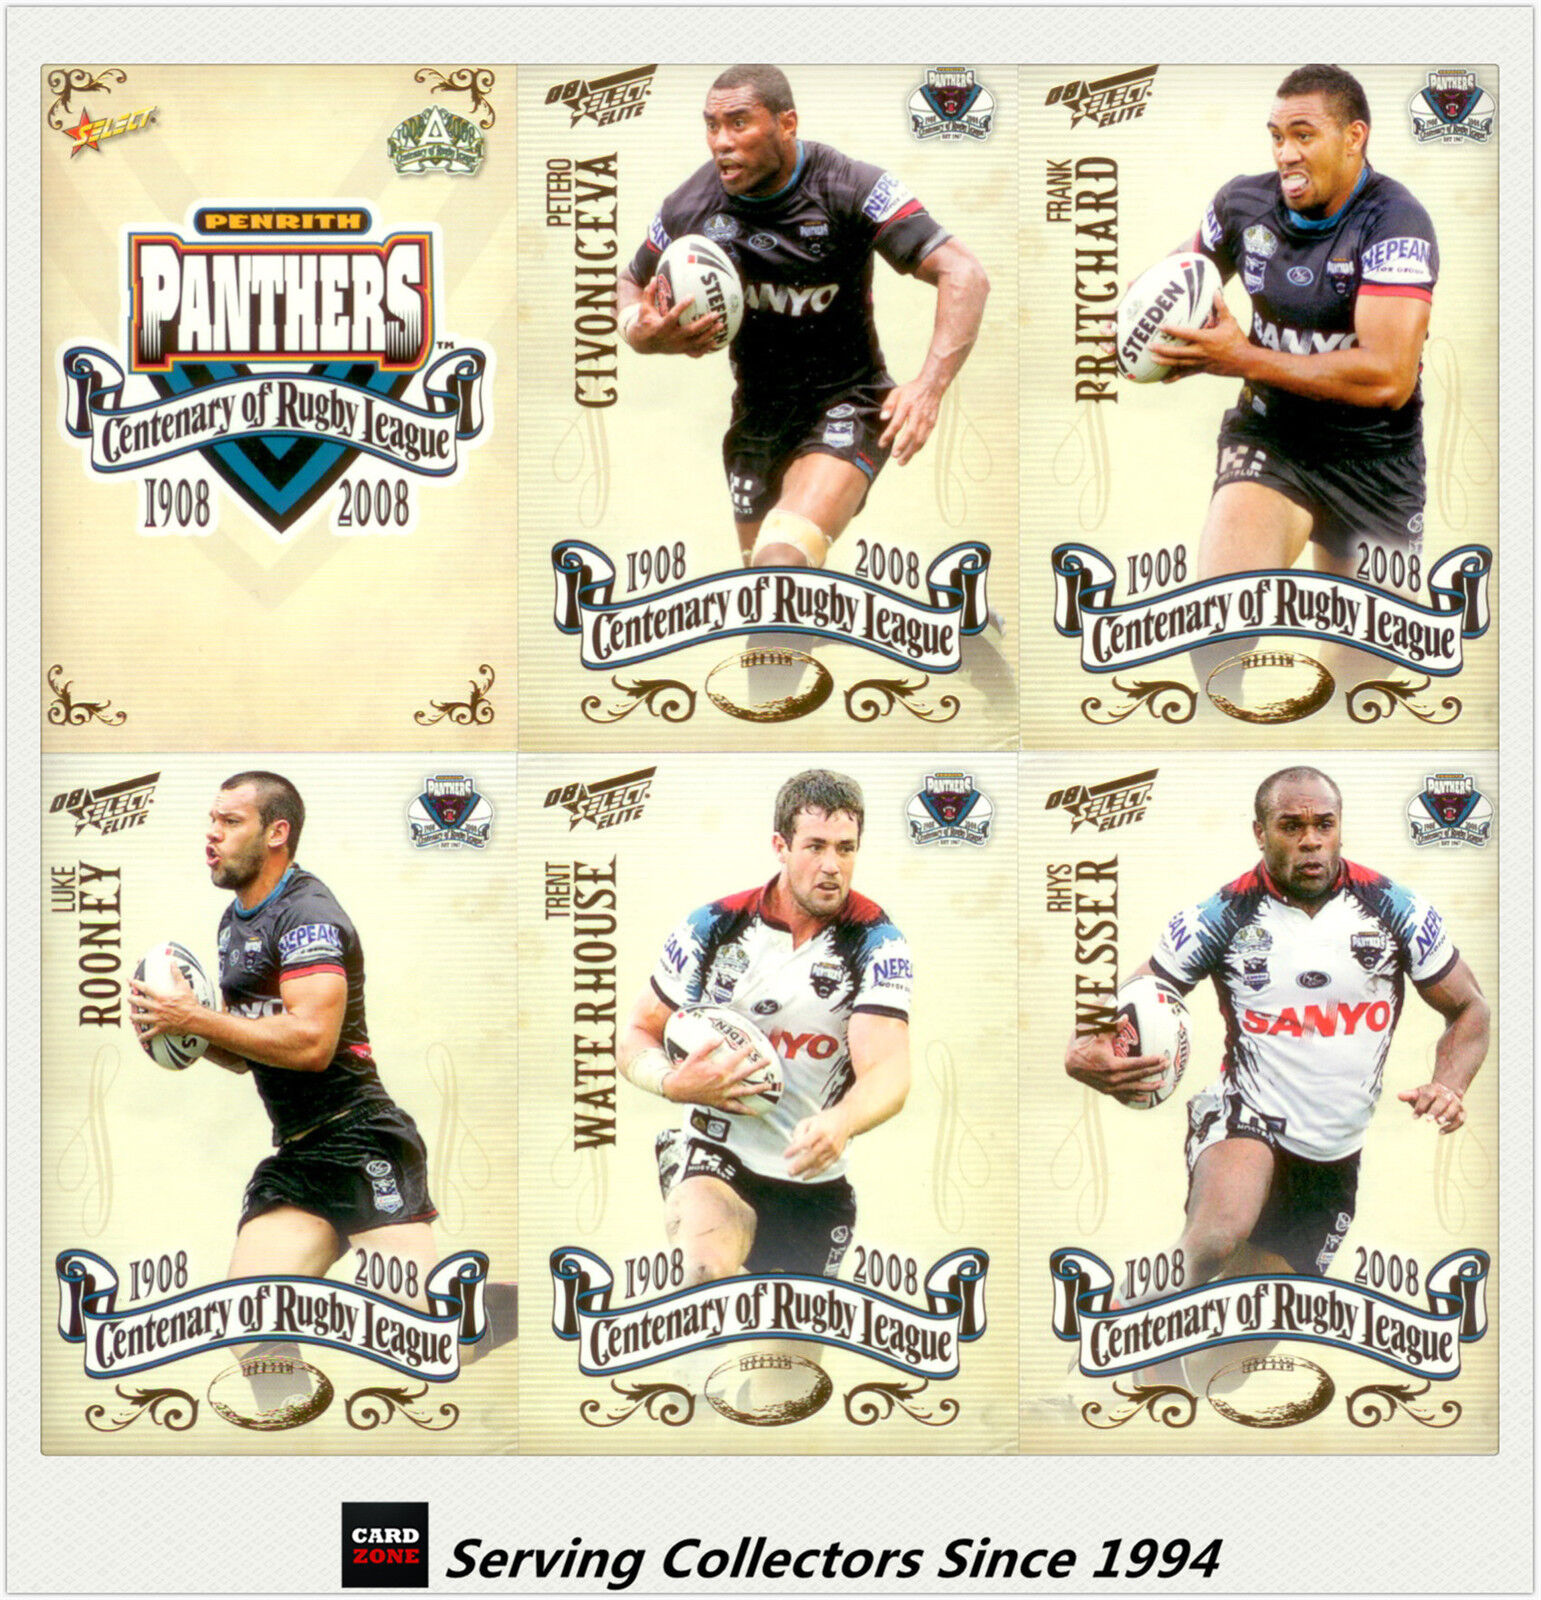 2008 NRL Centenary Of Rugby League Elite Players Card Team Set Panthers (6)